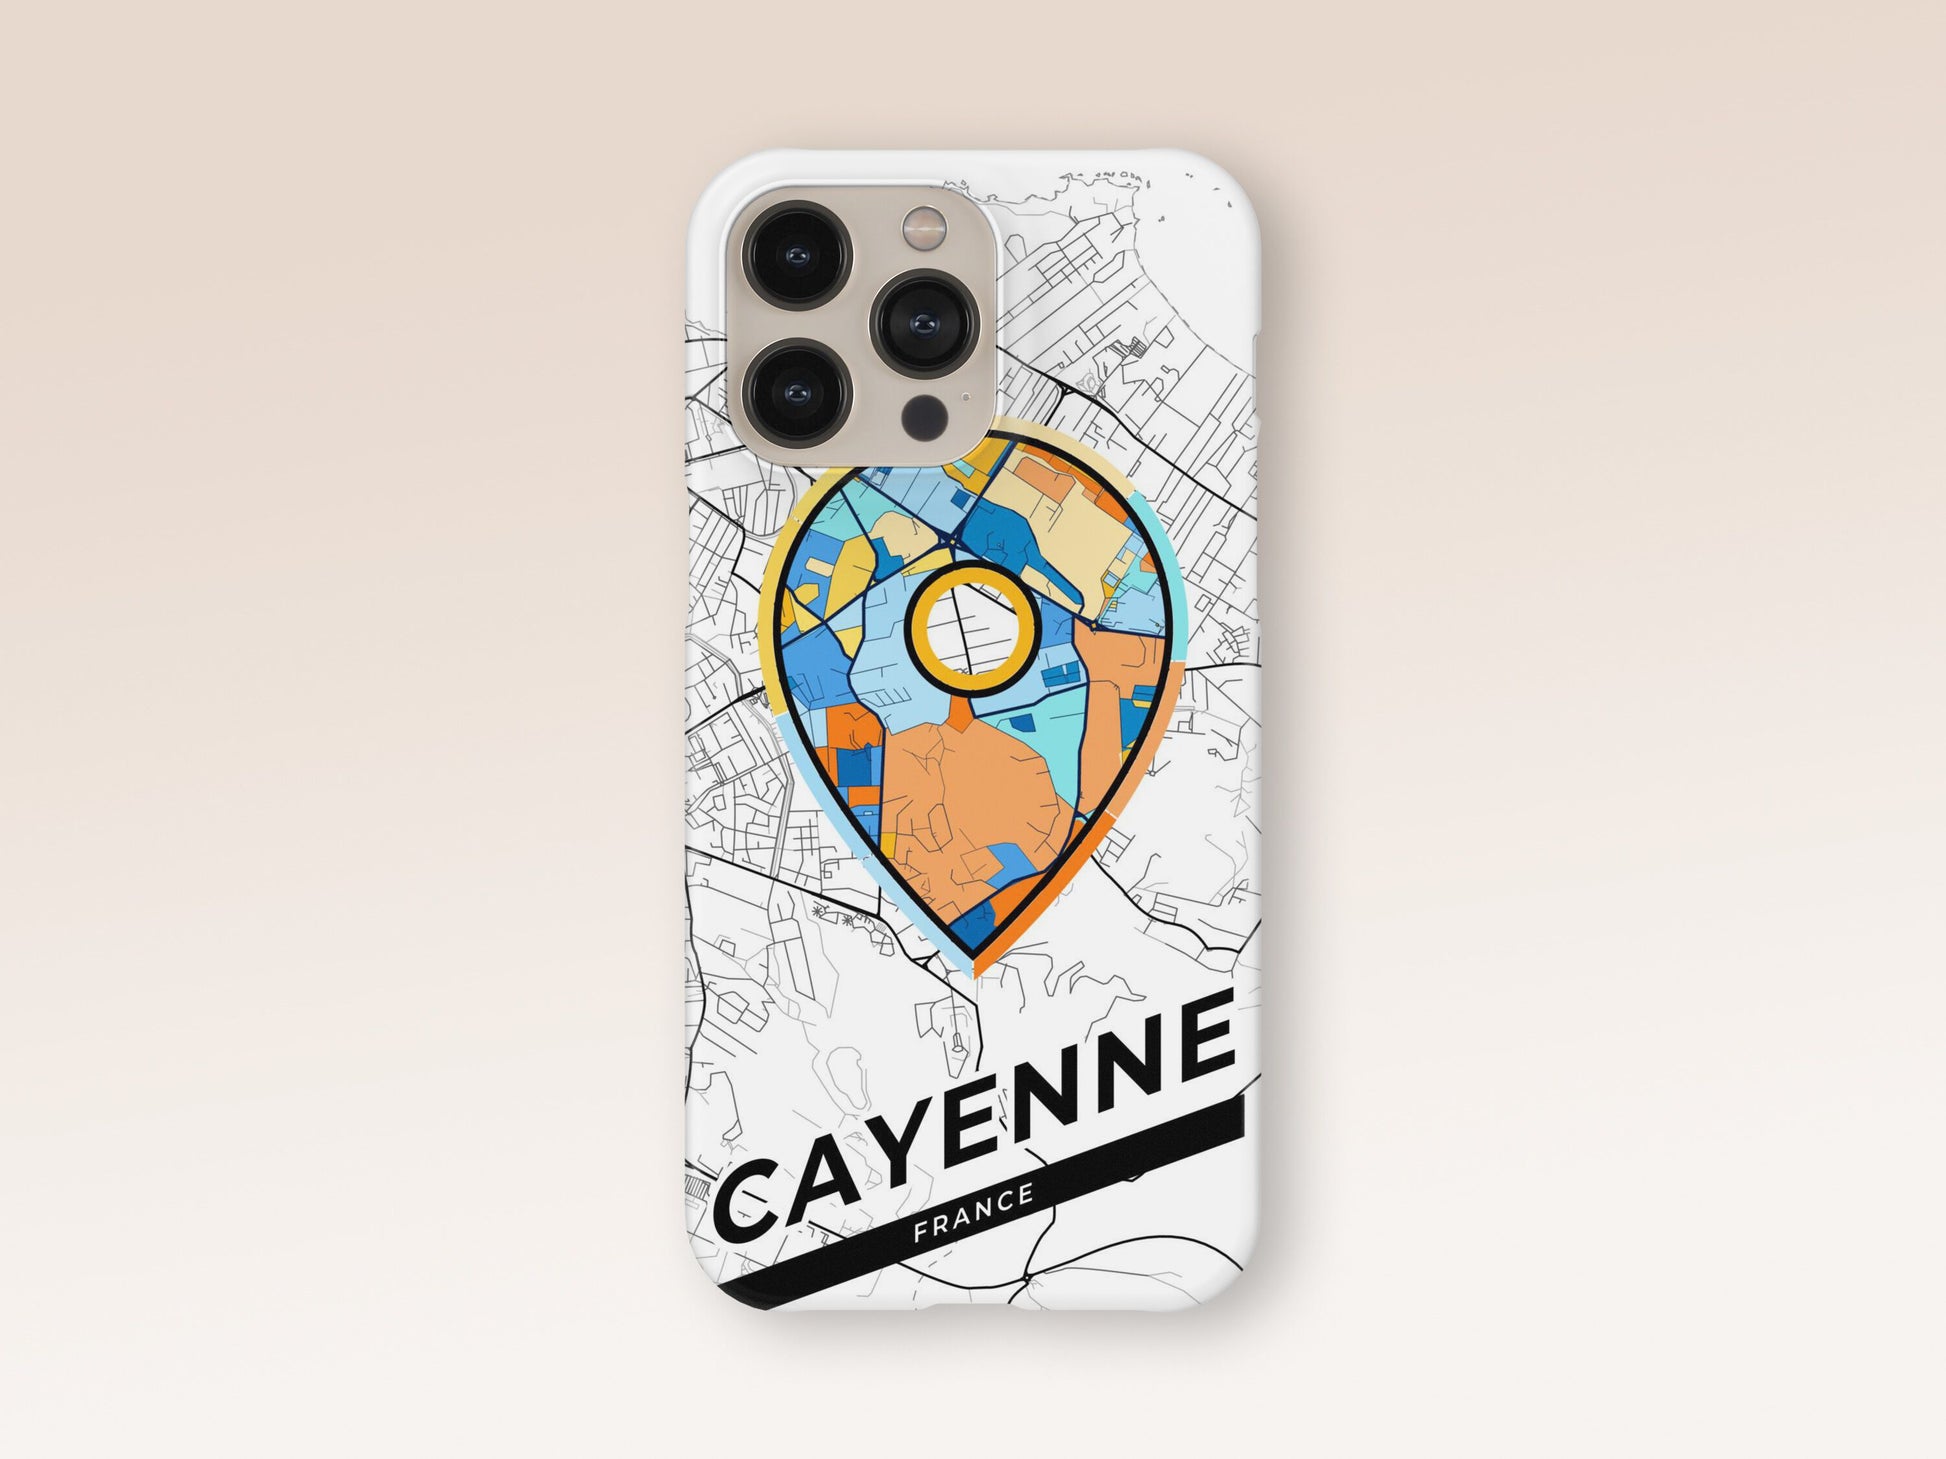 Cayenne France slim phone case with colorful icon. Birthday, wedding or housewarming gift. Couple match cases. 1